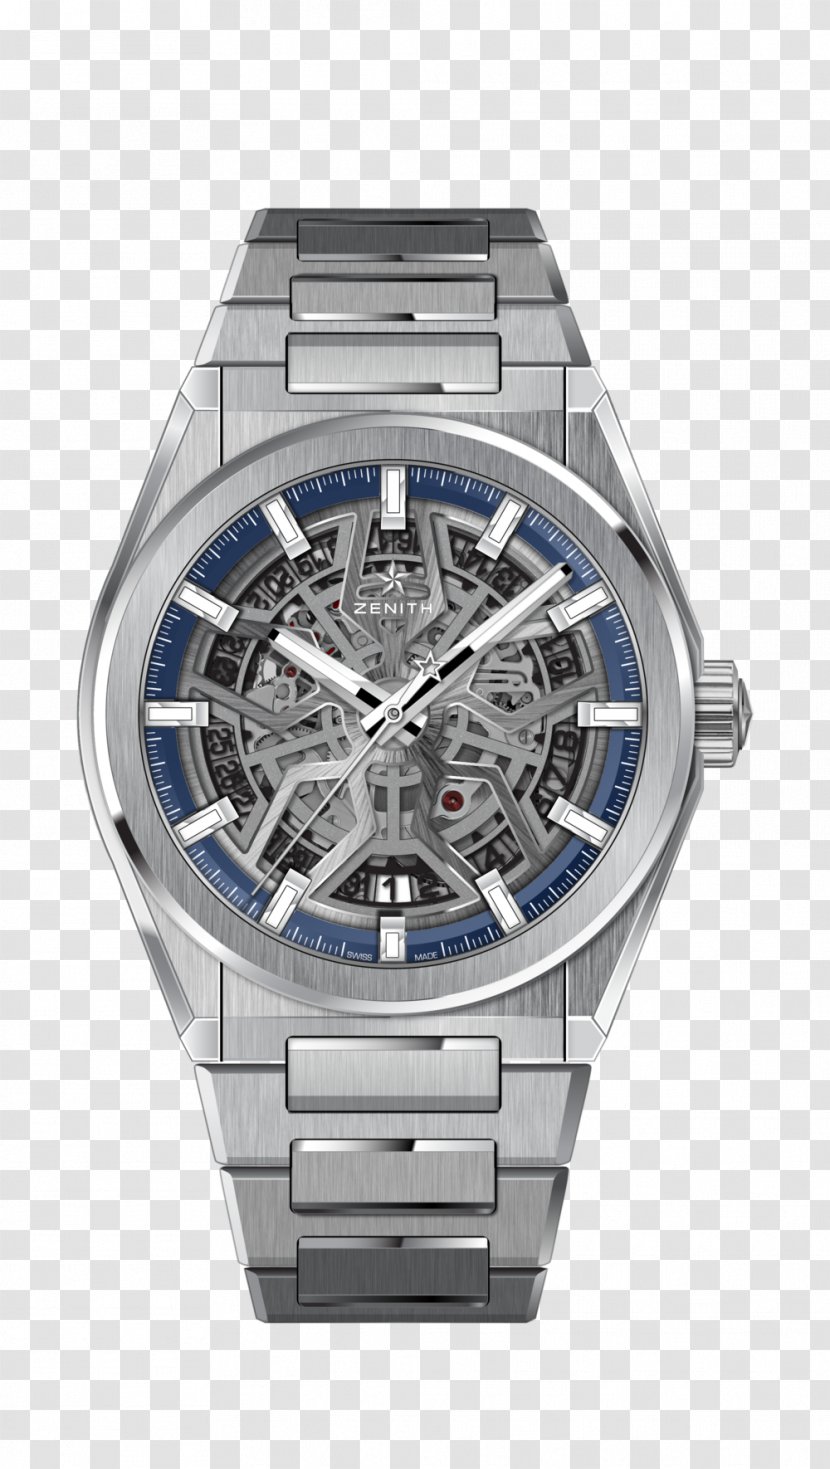 Baselworld Zenith Watch Movement Chronograph Transparent PNG